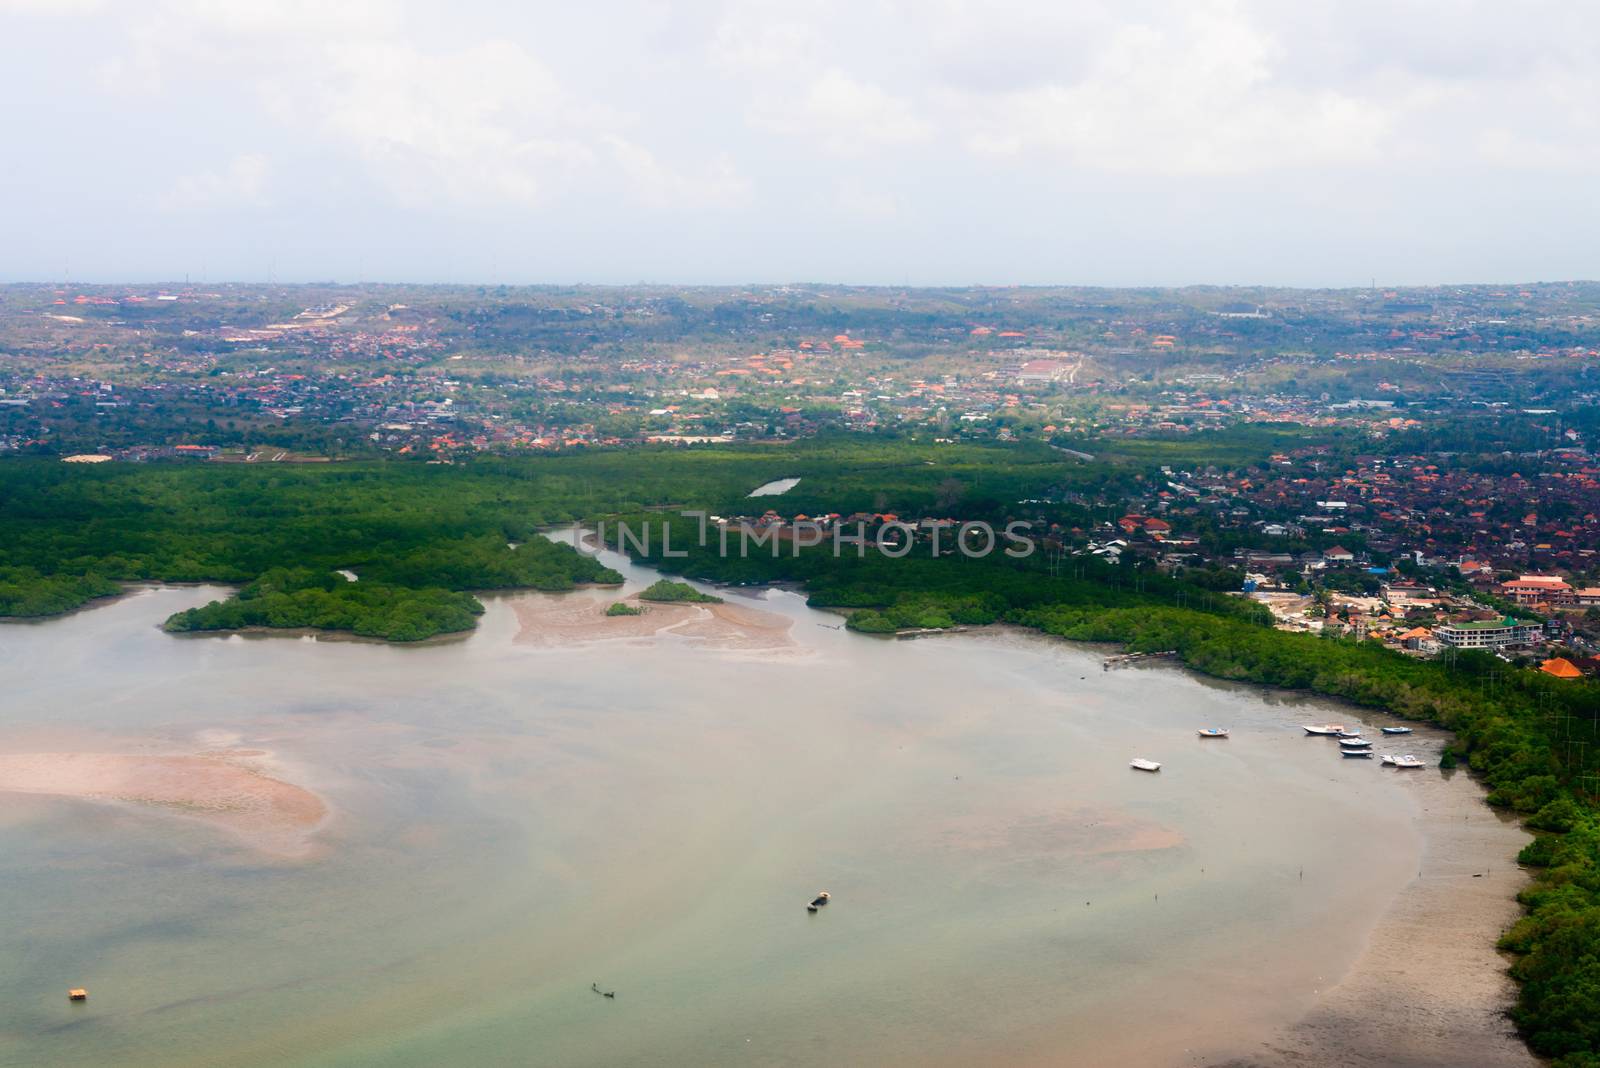 Aerial view of Denpasar on Bali showing buildings and mangrove forest